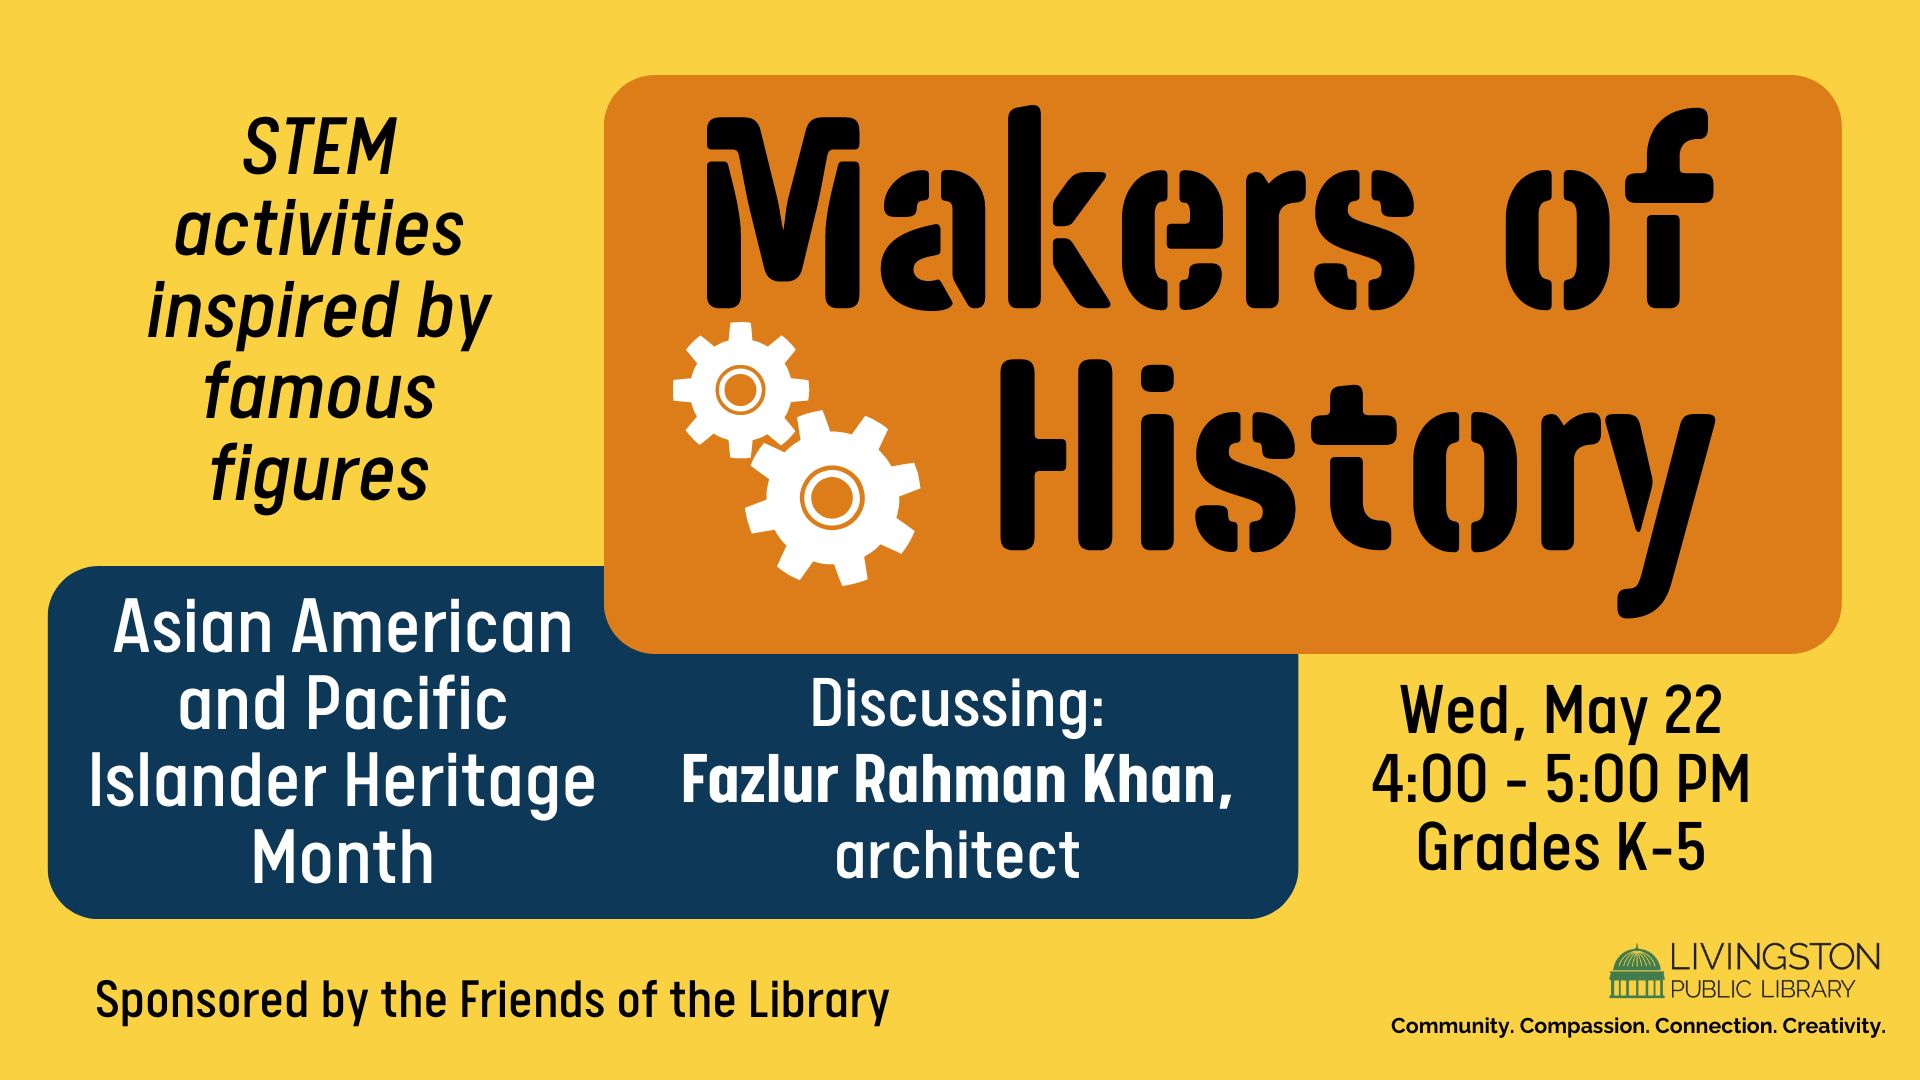 Makers of History: STEM activities inspired by famous figures. Asian American and Pacific Islander Heritage Month. Discussing: Fazlur Rahman Khan, architect. Tuesday, April 2nd. 4:00 - 5:00 PM. Grades K-5.  Sponsored by the Friends of the Library. Library logo. Community. Compassion. Connection. Creativity.